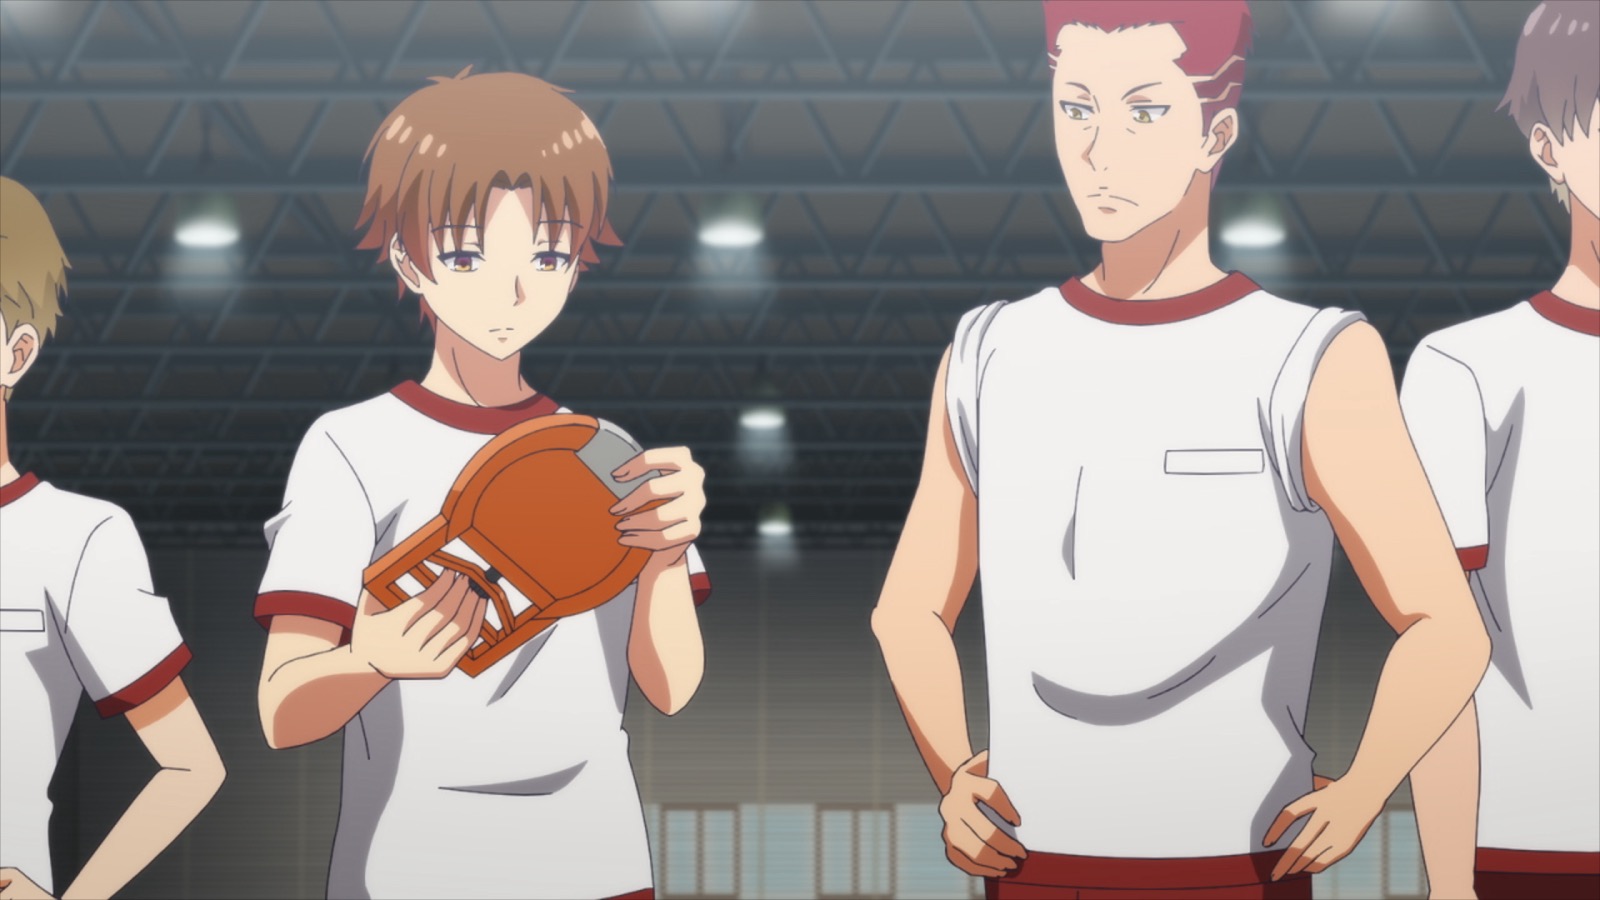 Classroom of the Elite Season 2 Episode 4 Review - The Sports Festival arc  begins